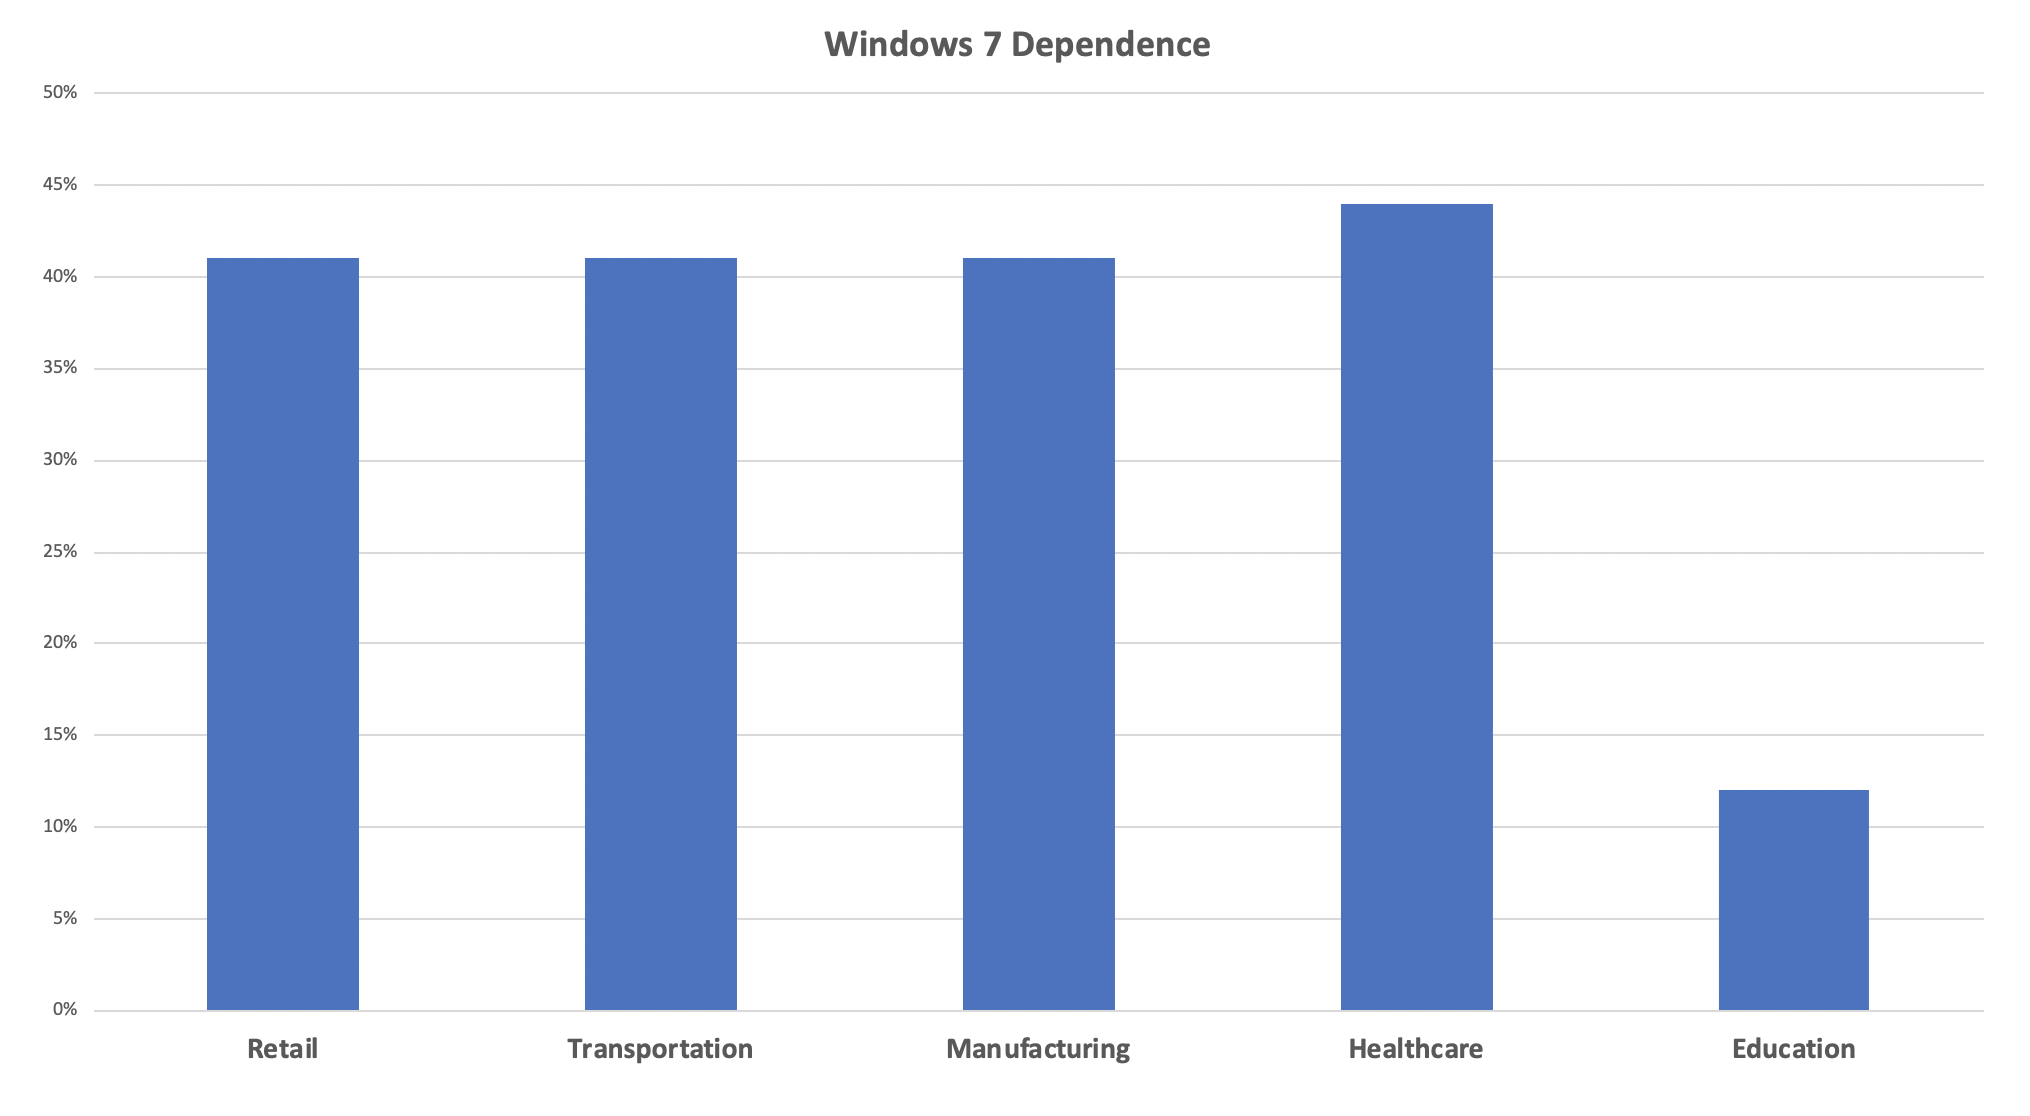 Industries relying the most on window's 7 computers